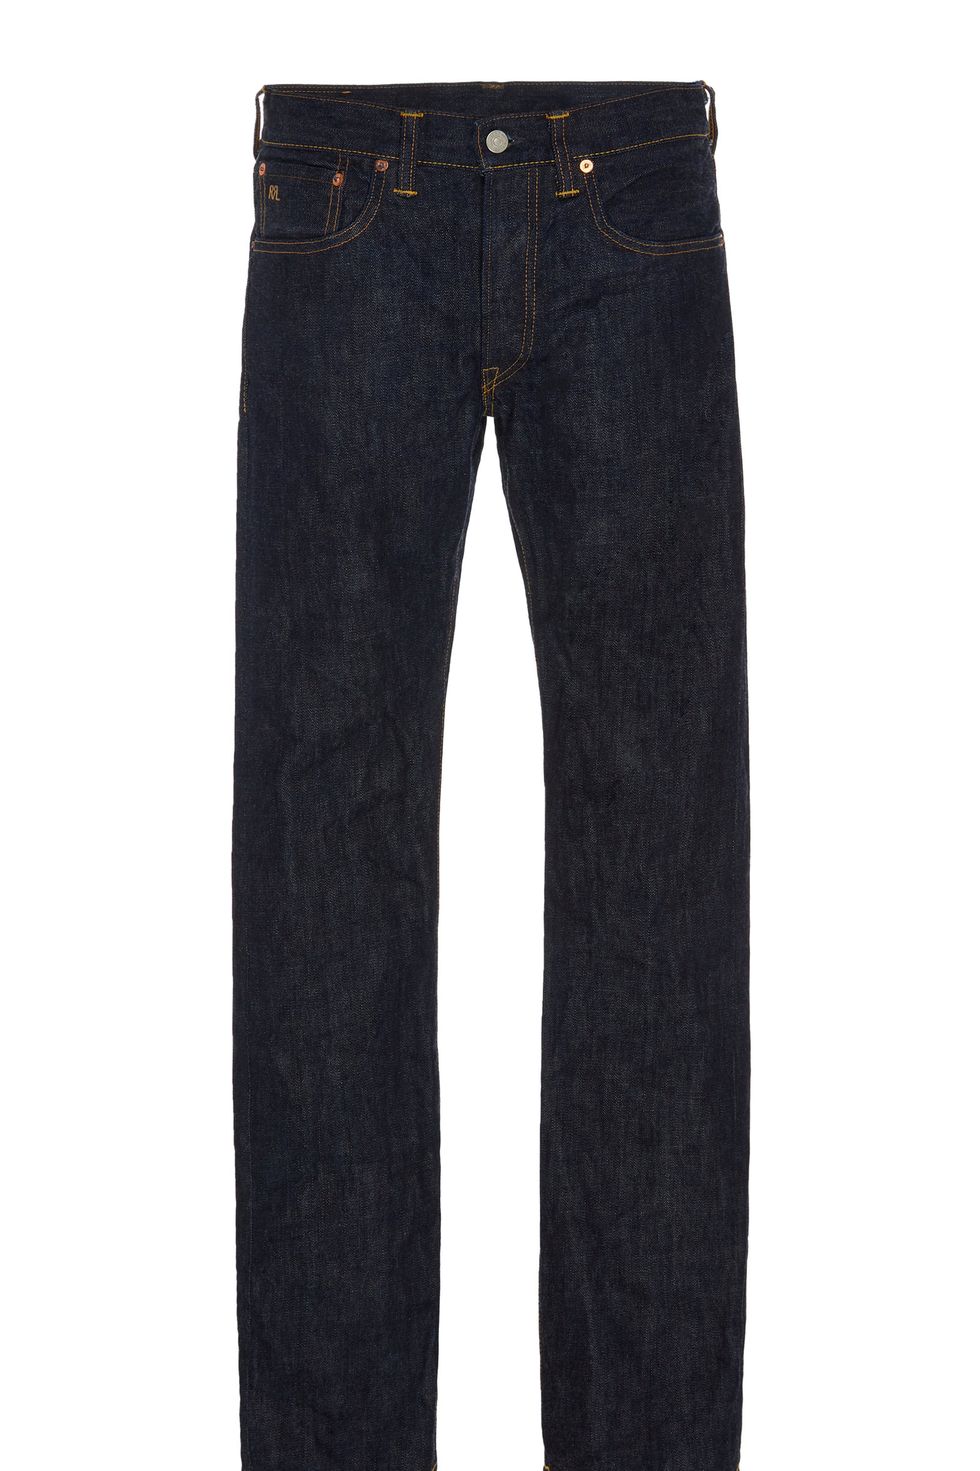 15 Best Selvedge Jeans for Men to Buy in 2022 - What is Selvedge Denim?